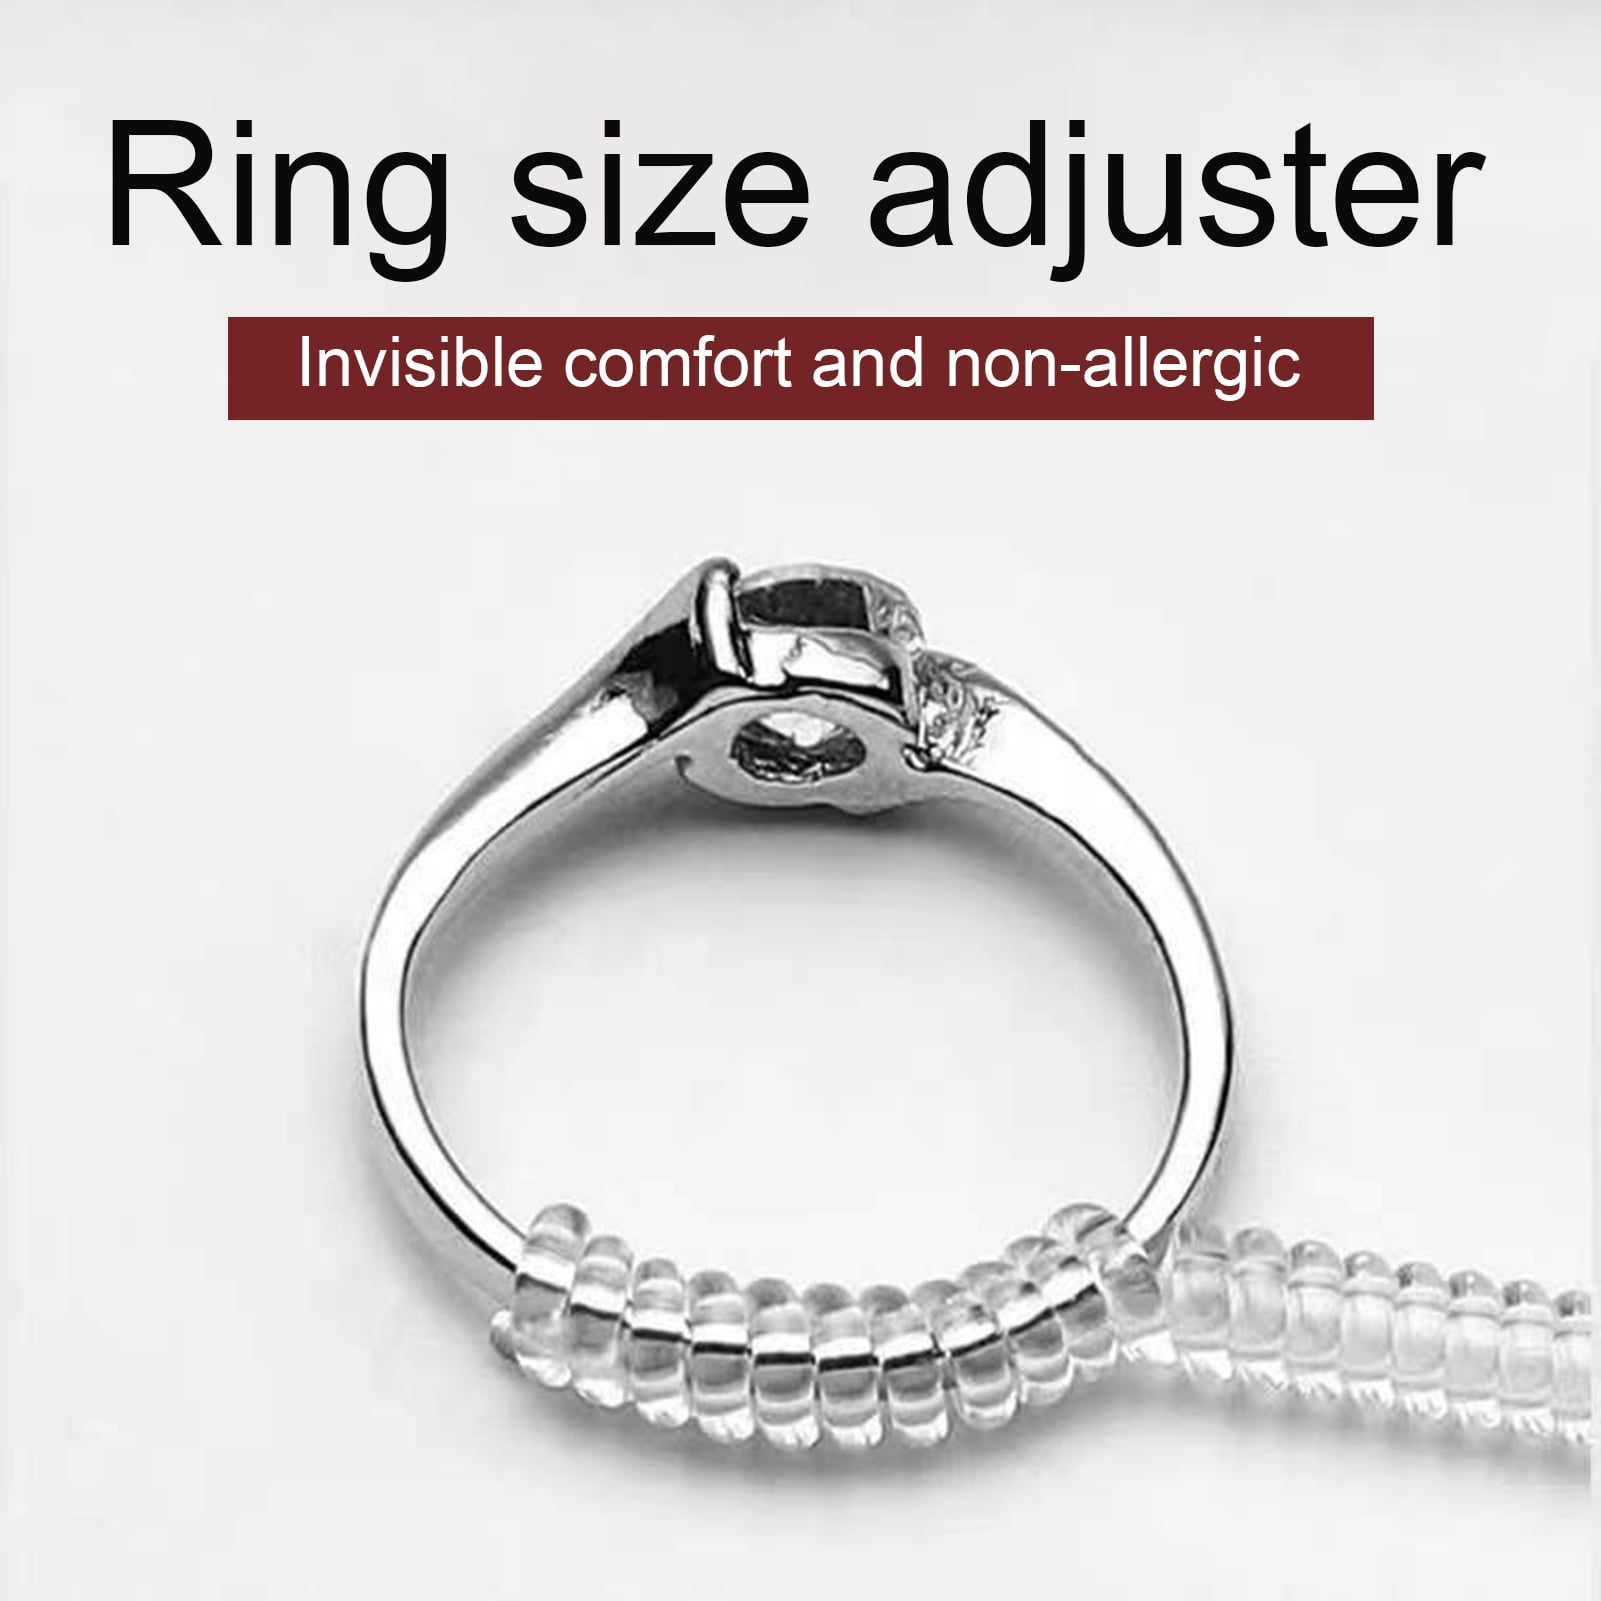 Best Ring Size Adjuster - GWHOLE Amazon Ring Adjuster Review